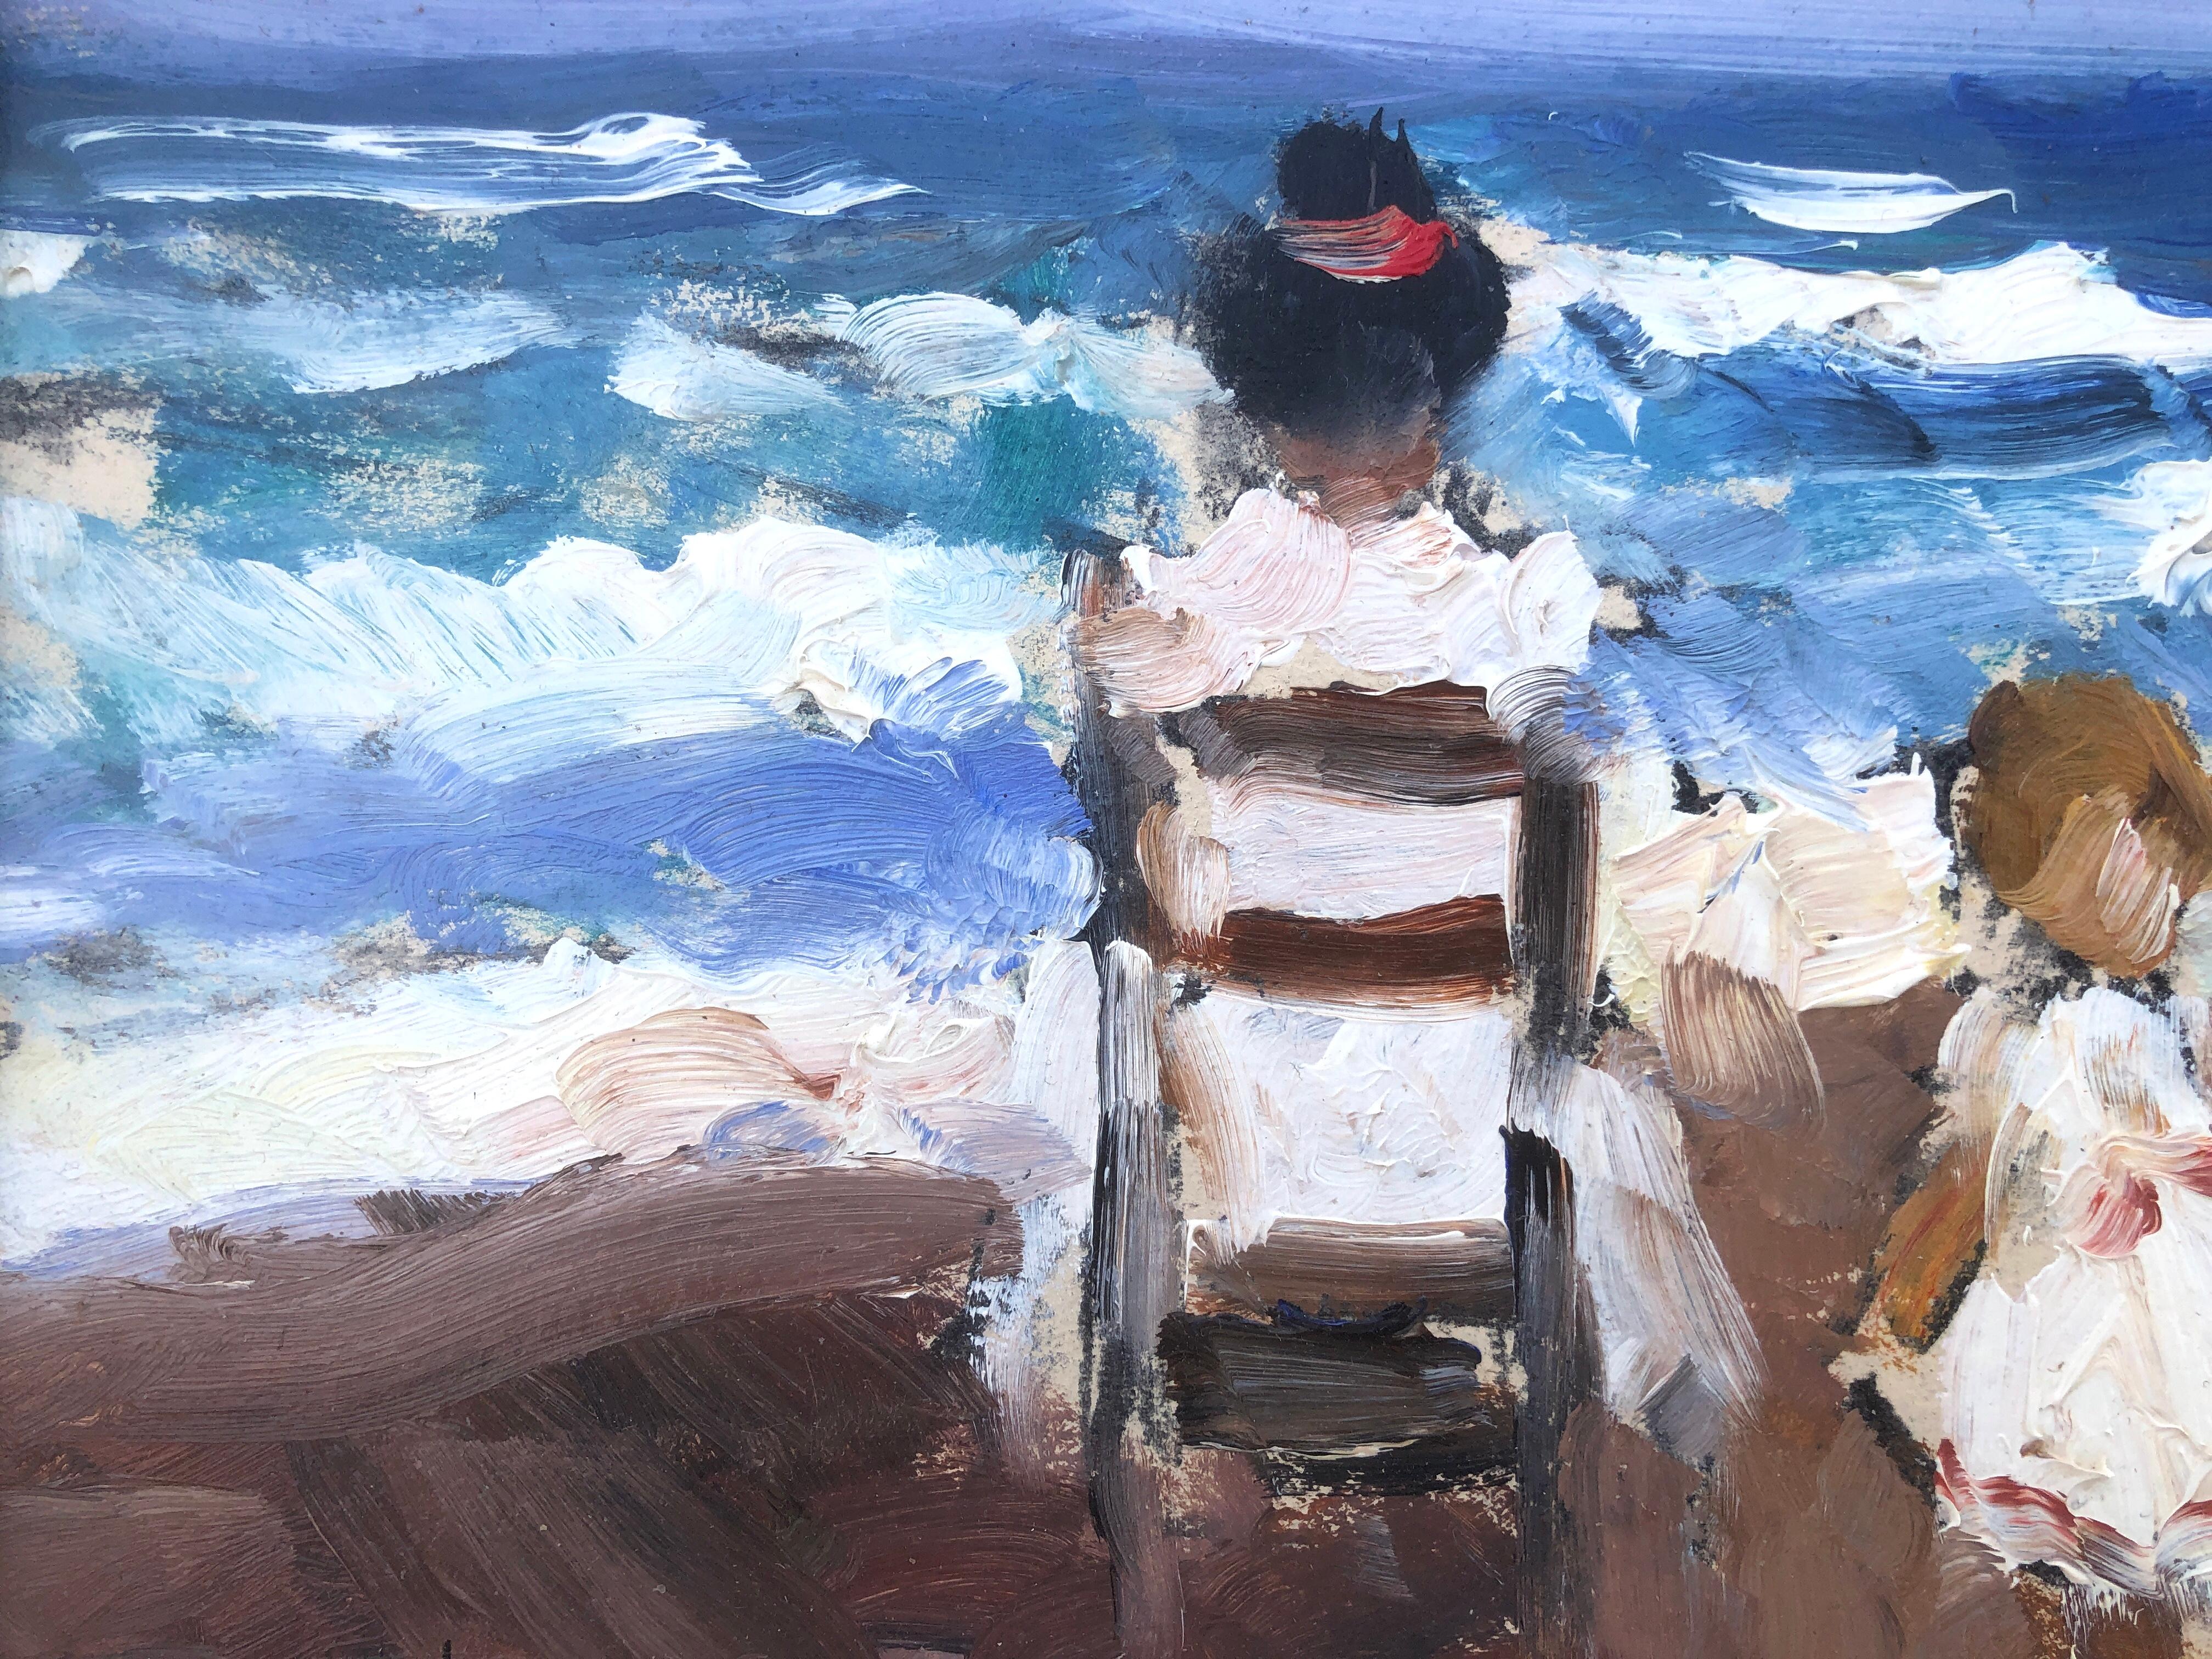 Joan Vives Maristany (XX) - Day at the beach - Oil on cardboard
Oil measures 16x22 cm.
Frame measures 22x28 cm.
The frame has flaws.